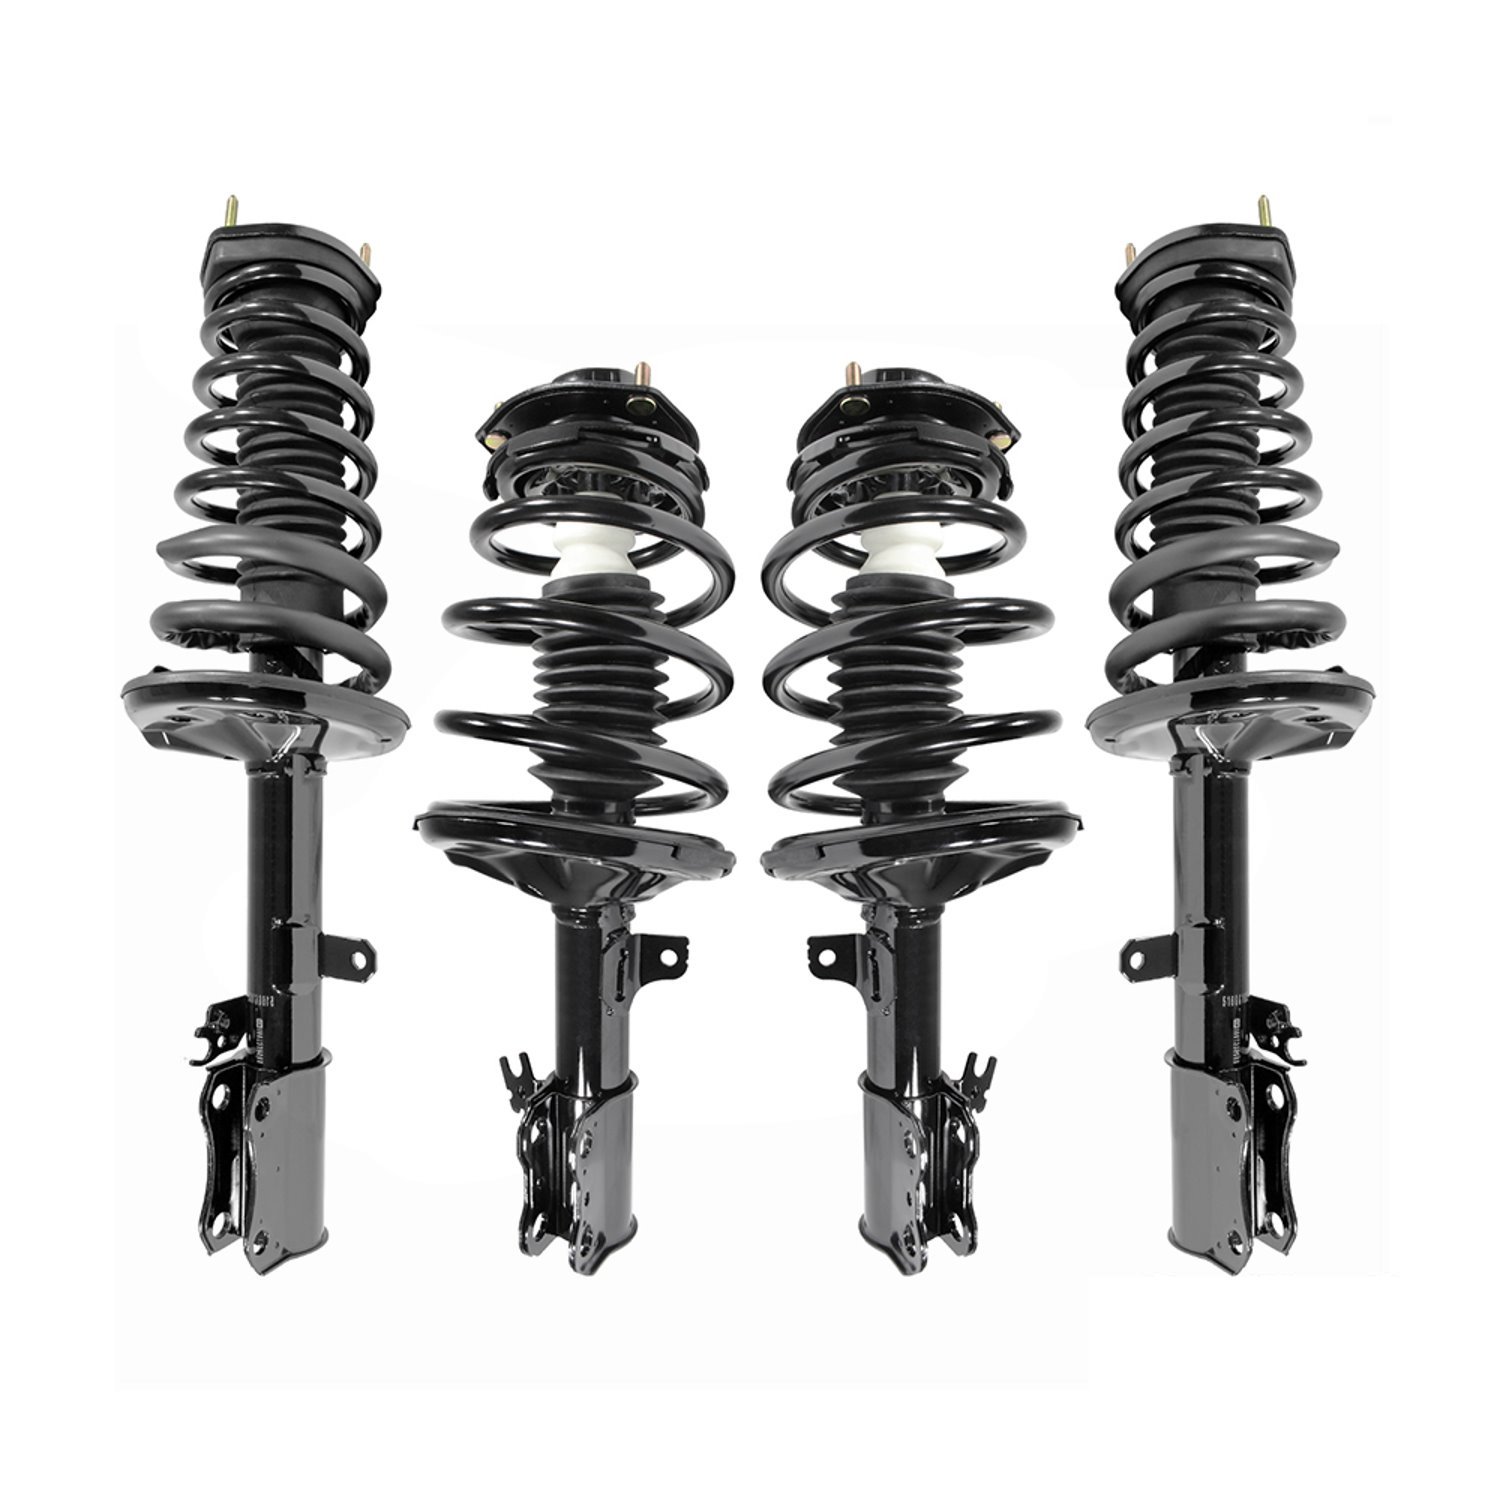 4-11281-15161-001 Front & Rear Suspension Strut & Coil Spring Assembly Kit Fits Select Lexus/Toyota